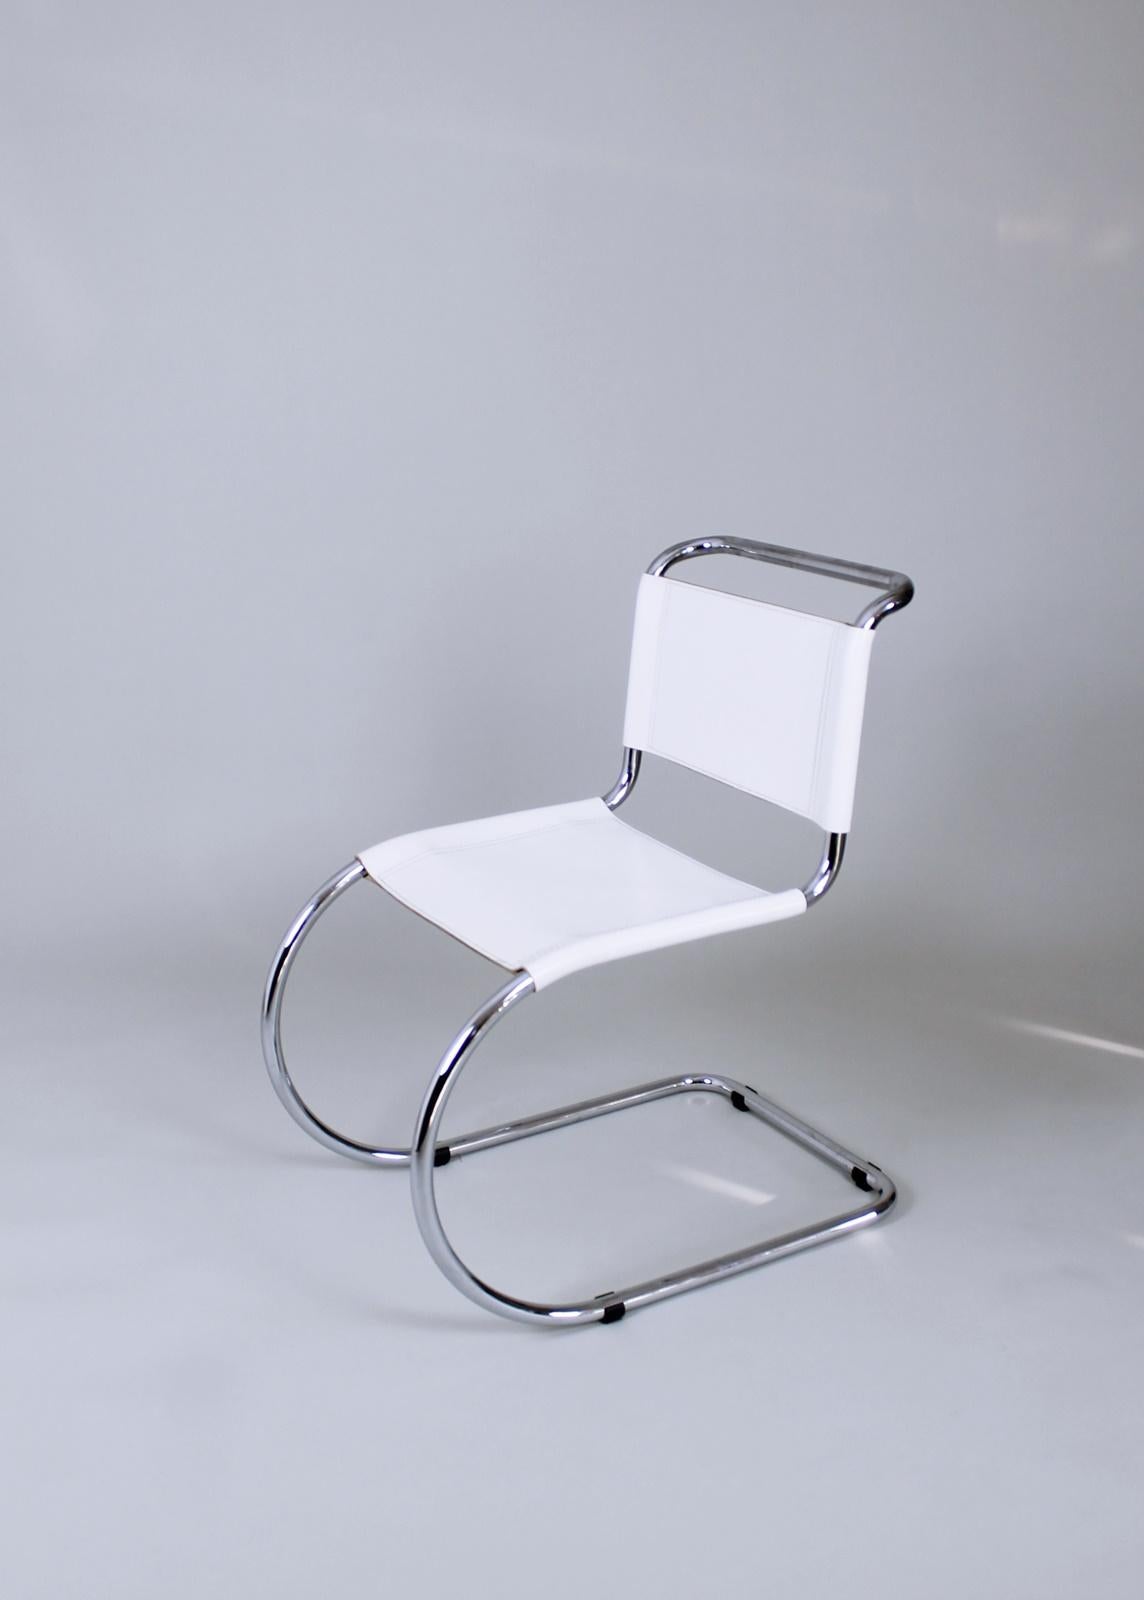 Rare vintage white leather MR 10 cantilever chairs, designed by Mies Van Der Rohe.
 Produced in Germany.
 The leather does have some scratches. This adds to the charm and age of the chairs but it is in good shape overall.
 The chrome is shiny, no